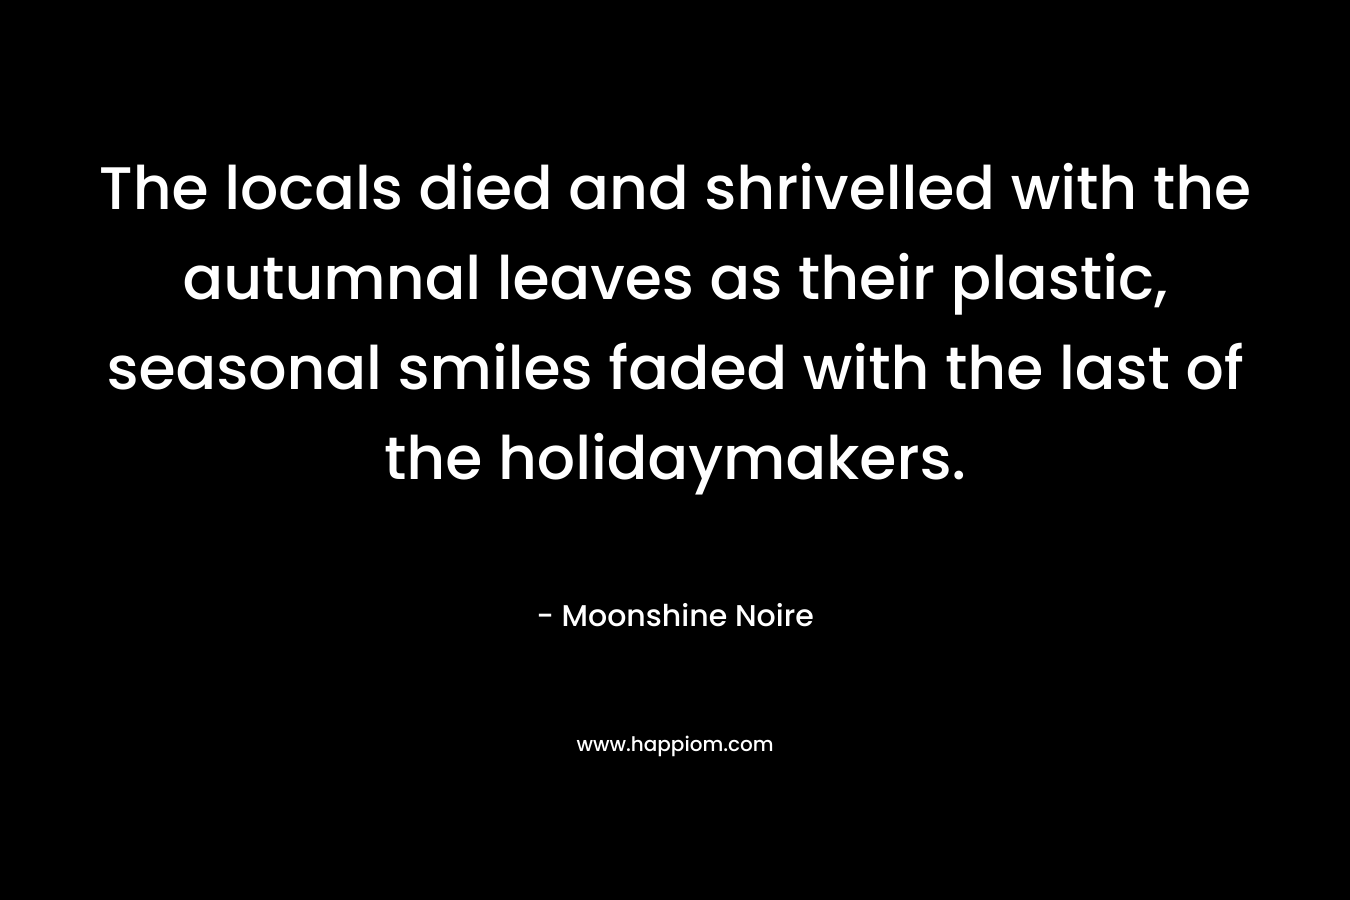 The locals died and shrivelled with the autumnal leaves as their plastic, seasonal smiles faded with the last of the holidaymakers. – Moonshine Noire